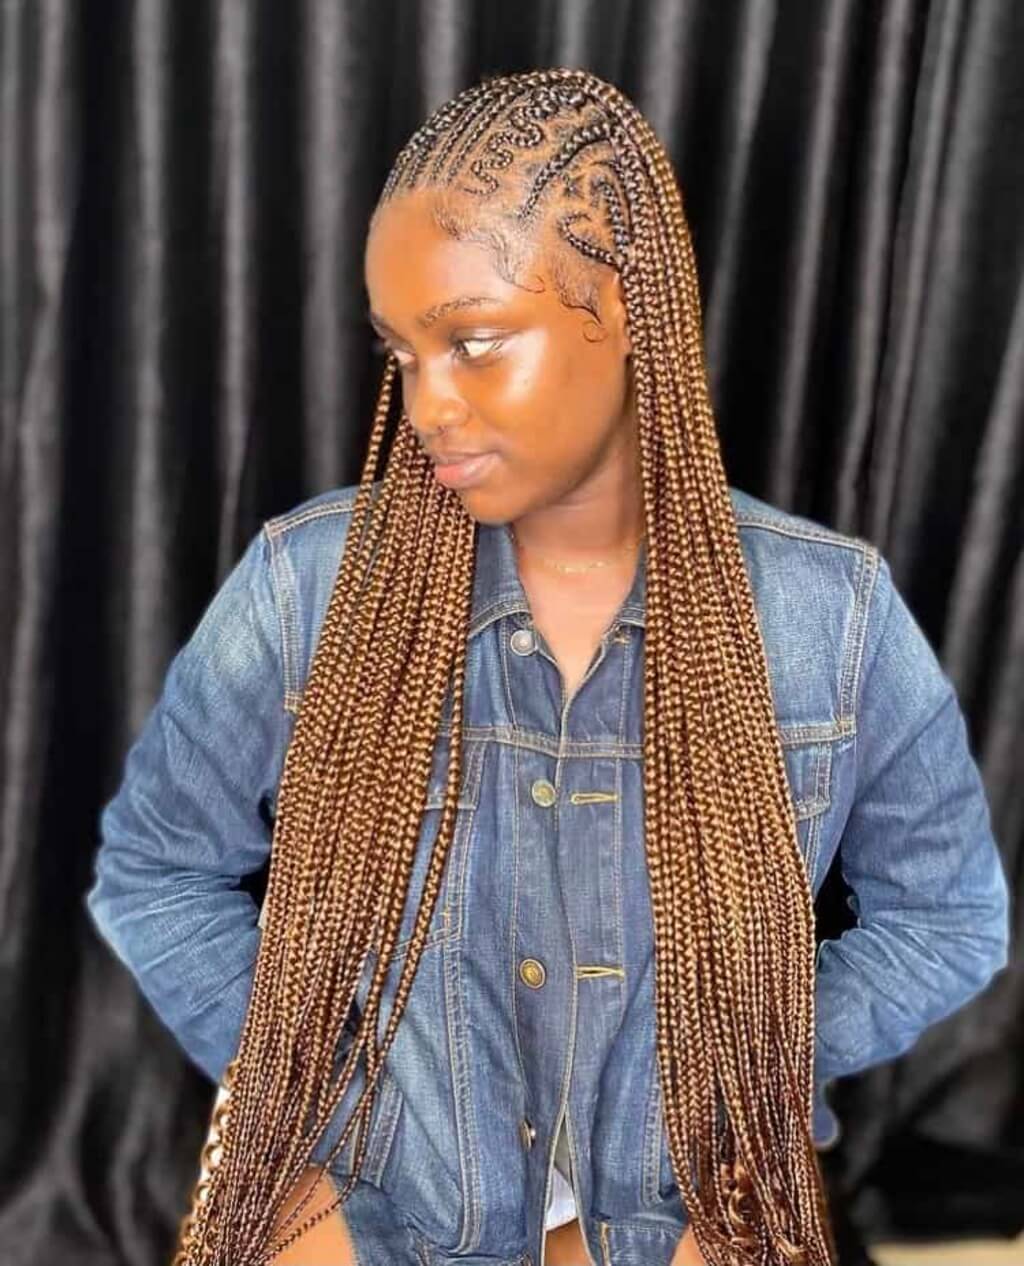 Traditional Tribal Knotless Braids with Heart